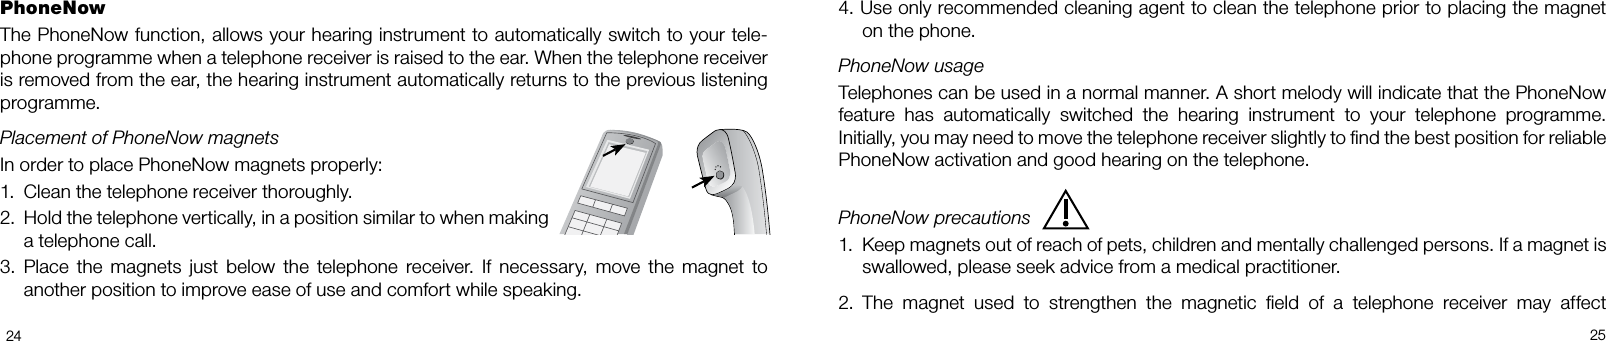  24254. Use only recommended cleaning agent to clean the telephone prior to placing the magnet on the phone.PhoneNow usageTelephones can be used in a normal manner. A short melody will indicate that the PhoneNow  feature  has  automatically  switched  the  hearing  instrument  to  your  telephone  programme.  Initially, you may need to move the telephone receiver slightly to nd the best position for reliable  PhoneNow activation and good hearing on the telephone. PhoneNow precautions1.  Keep magnets out of reach of pets, children and mentally challenged persons. If a magnet is swallowed, please seek advice from a medical practitioner.2.  The  magnet  used  to  strengthen  the  magnetic  eld  of  a  telephone  receiver  may  affect PhoneNowThe PhoneNow function, allows your hearing instrument to automatically switch to your telephone programme when a telephone receiver is raised to the ear. When the telephone receiver is removed from the ear, the hearing instrument automatically returns to the previous listening programme.Placement of PhoneNow magnetsIn order to place PhoneNow magnets properly:1.  Clean the telephone receiver thoroughly.2.  Hold the telephone vertically, in a position similar to when making a telephone call.3.  Place  the  magnets  just  below  the  telephone  receiver.  If  necessary,  move  the  magnet  to another position to improve ease of use and comfort while speaking.